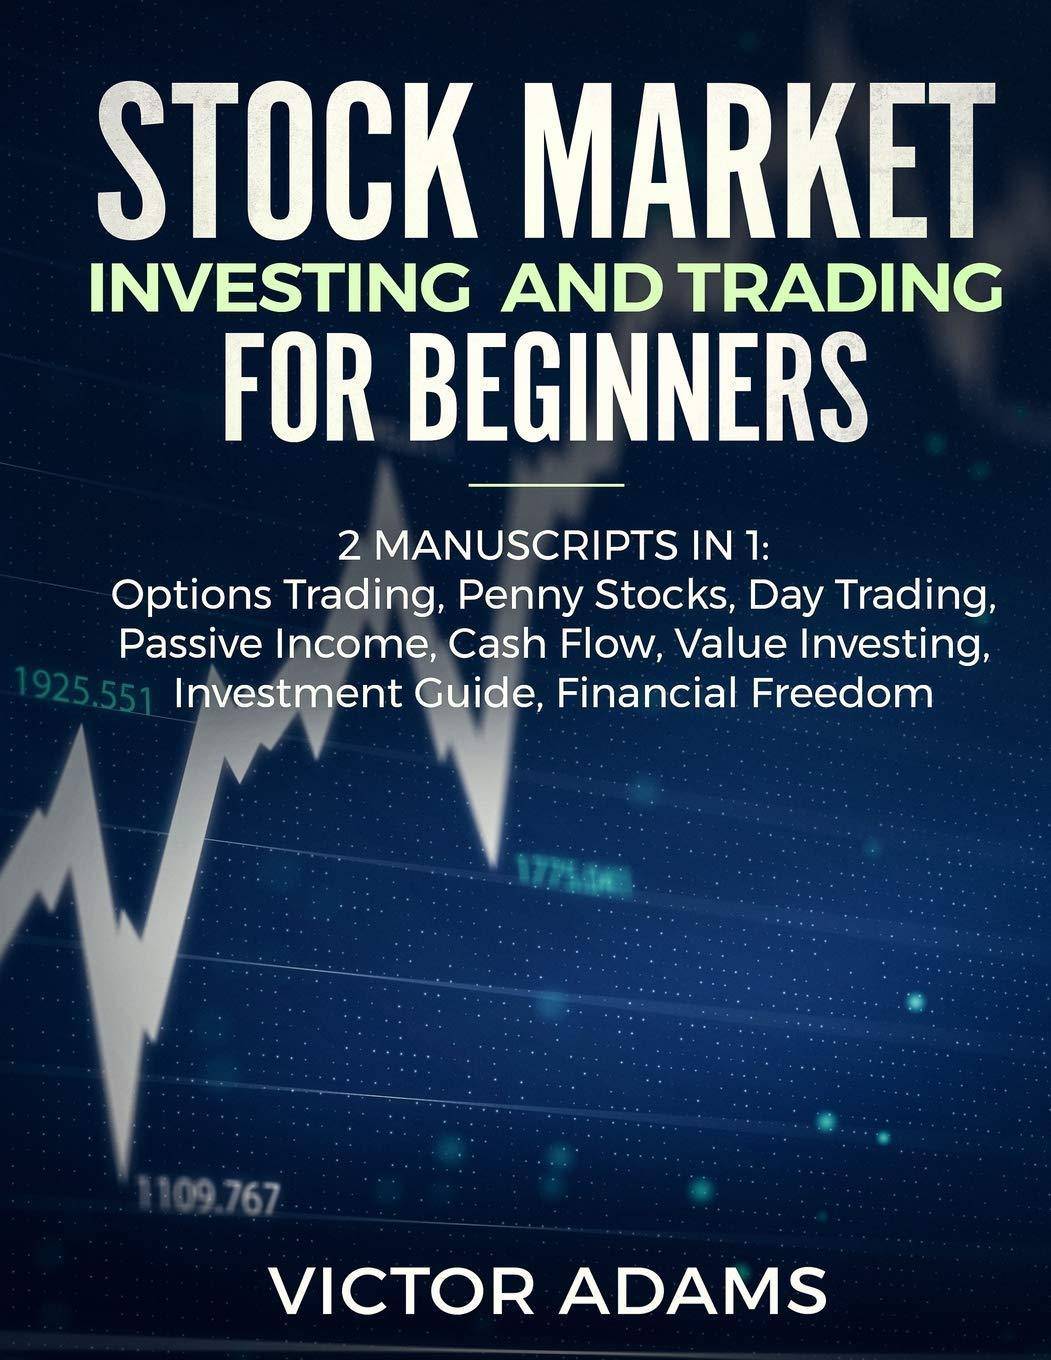 Stock Market Investing and Trading for Beginners (2 Manuscripts in 1) - SureShot Books Publishing LLC